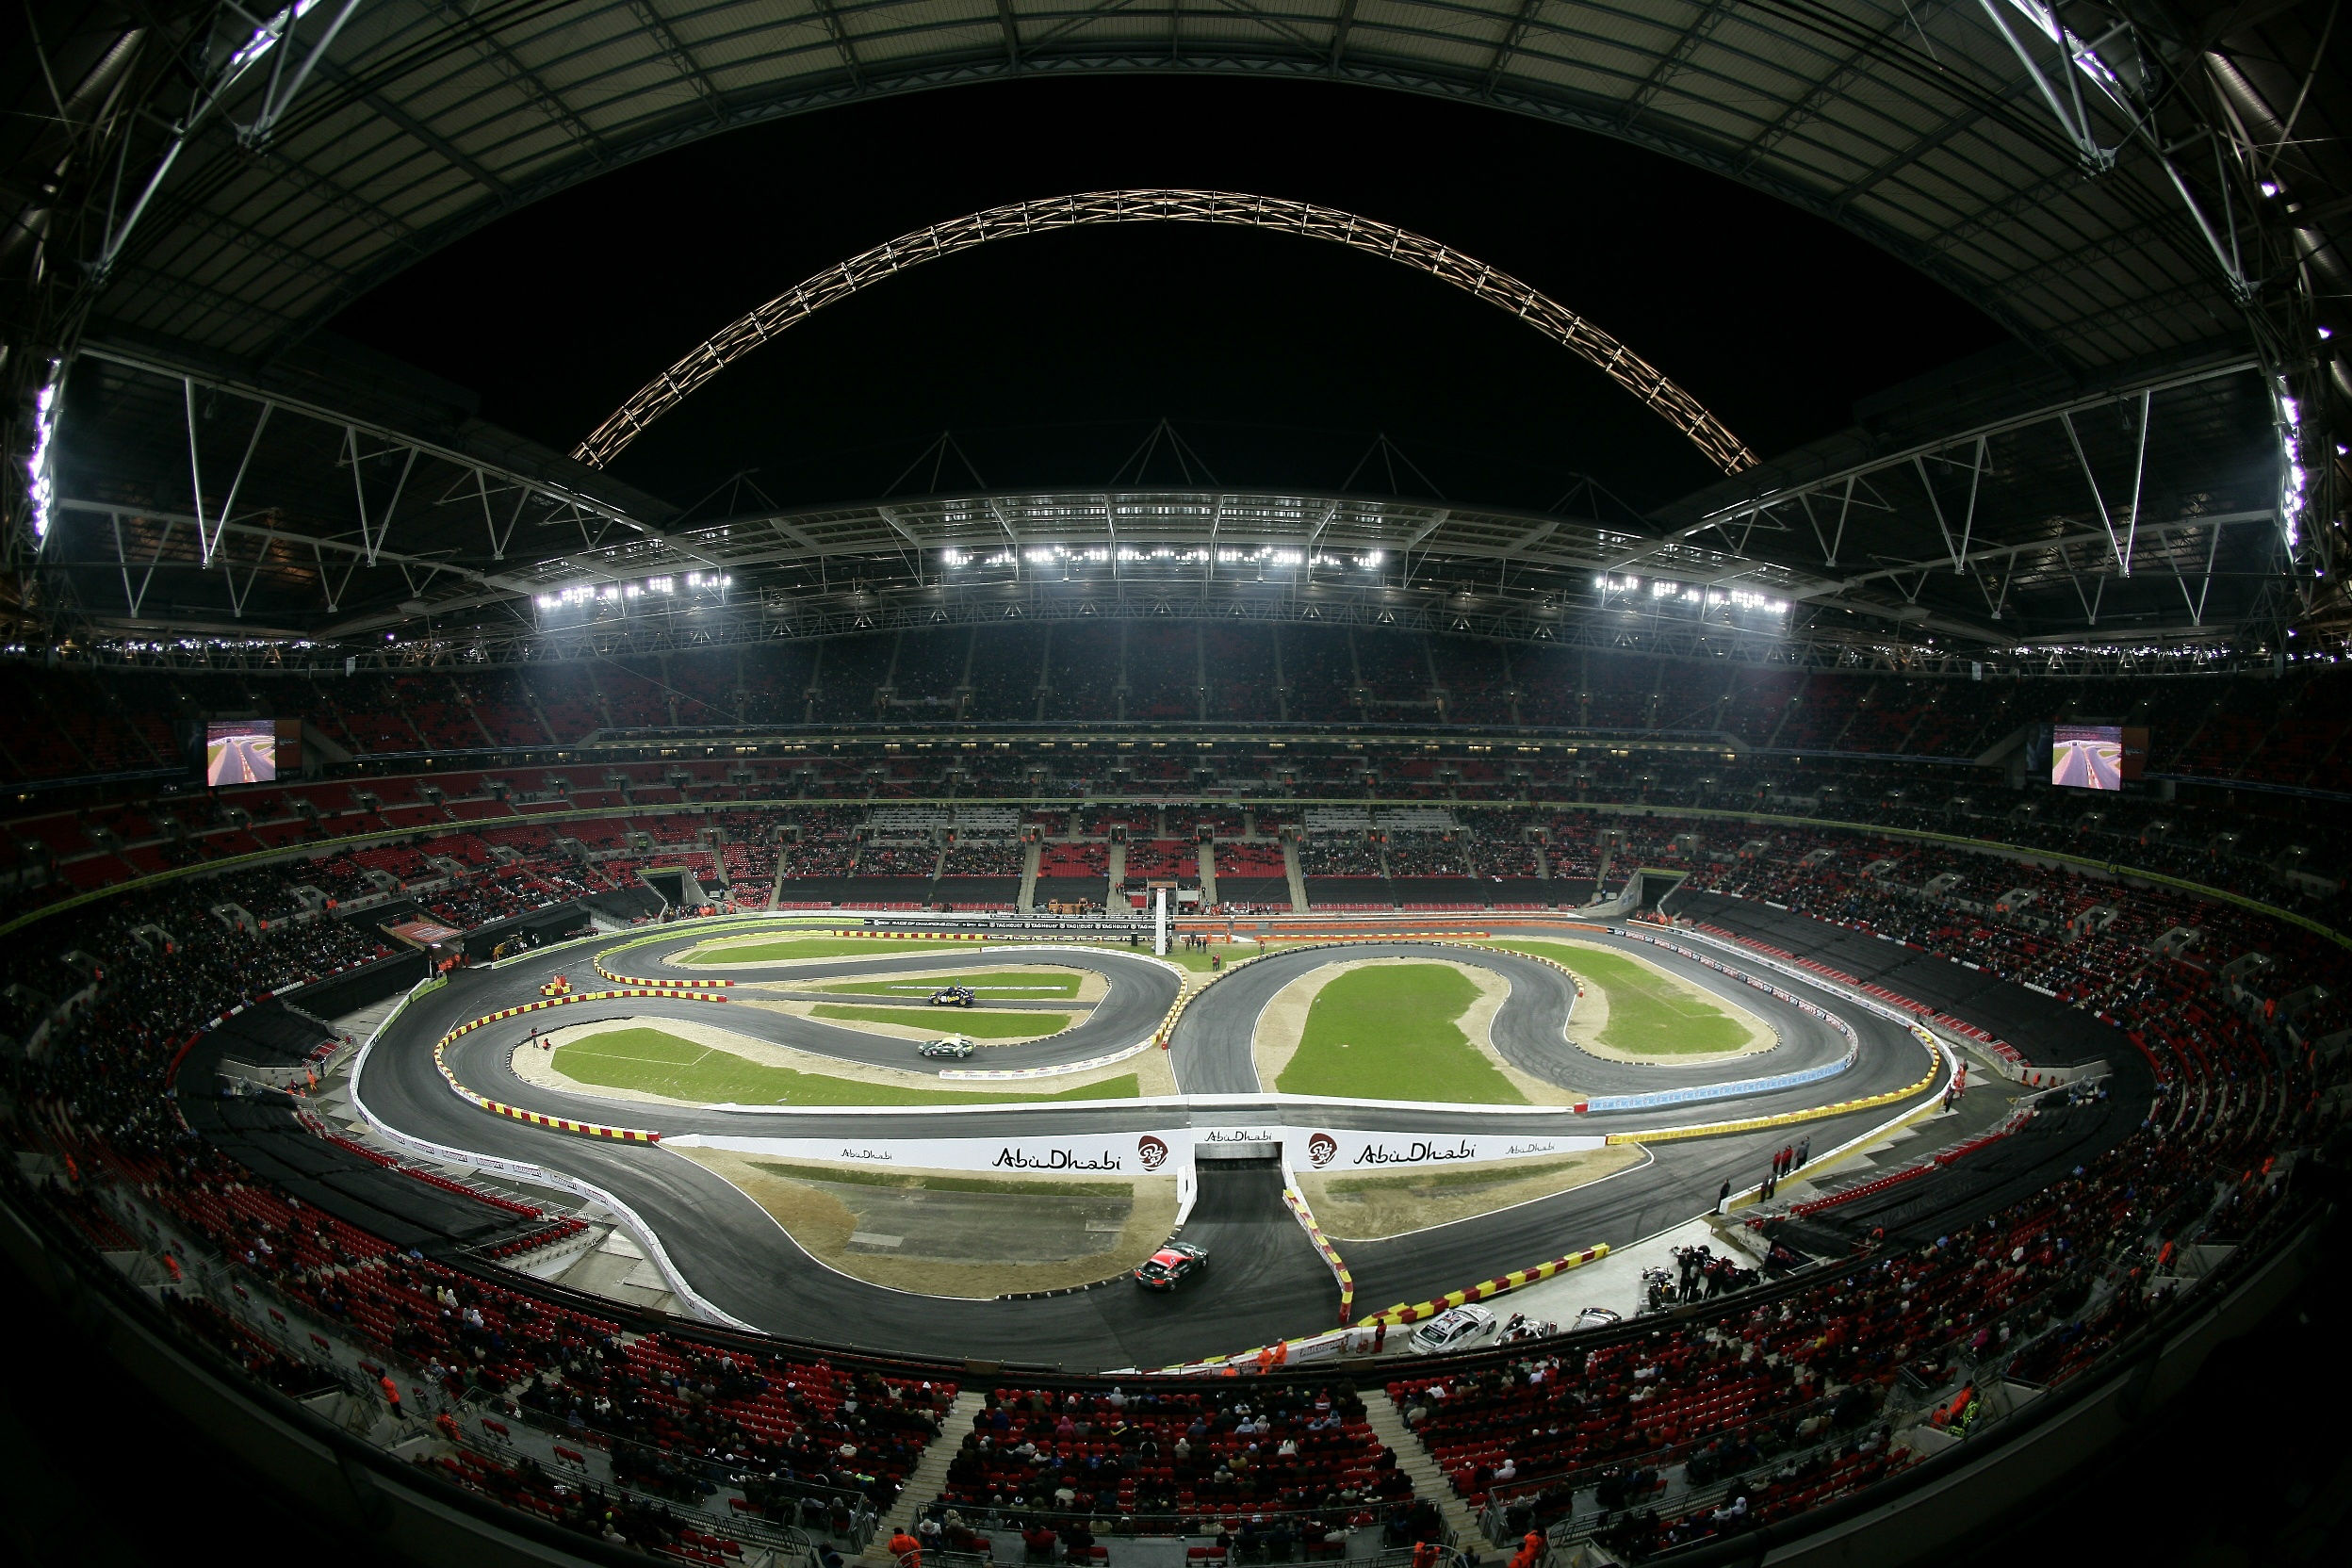 Race of Champions is being held in London in 2015